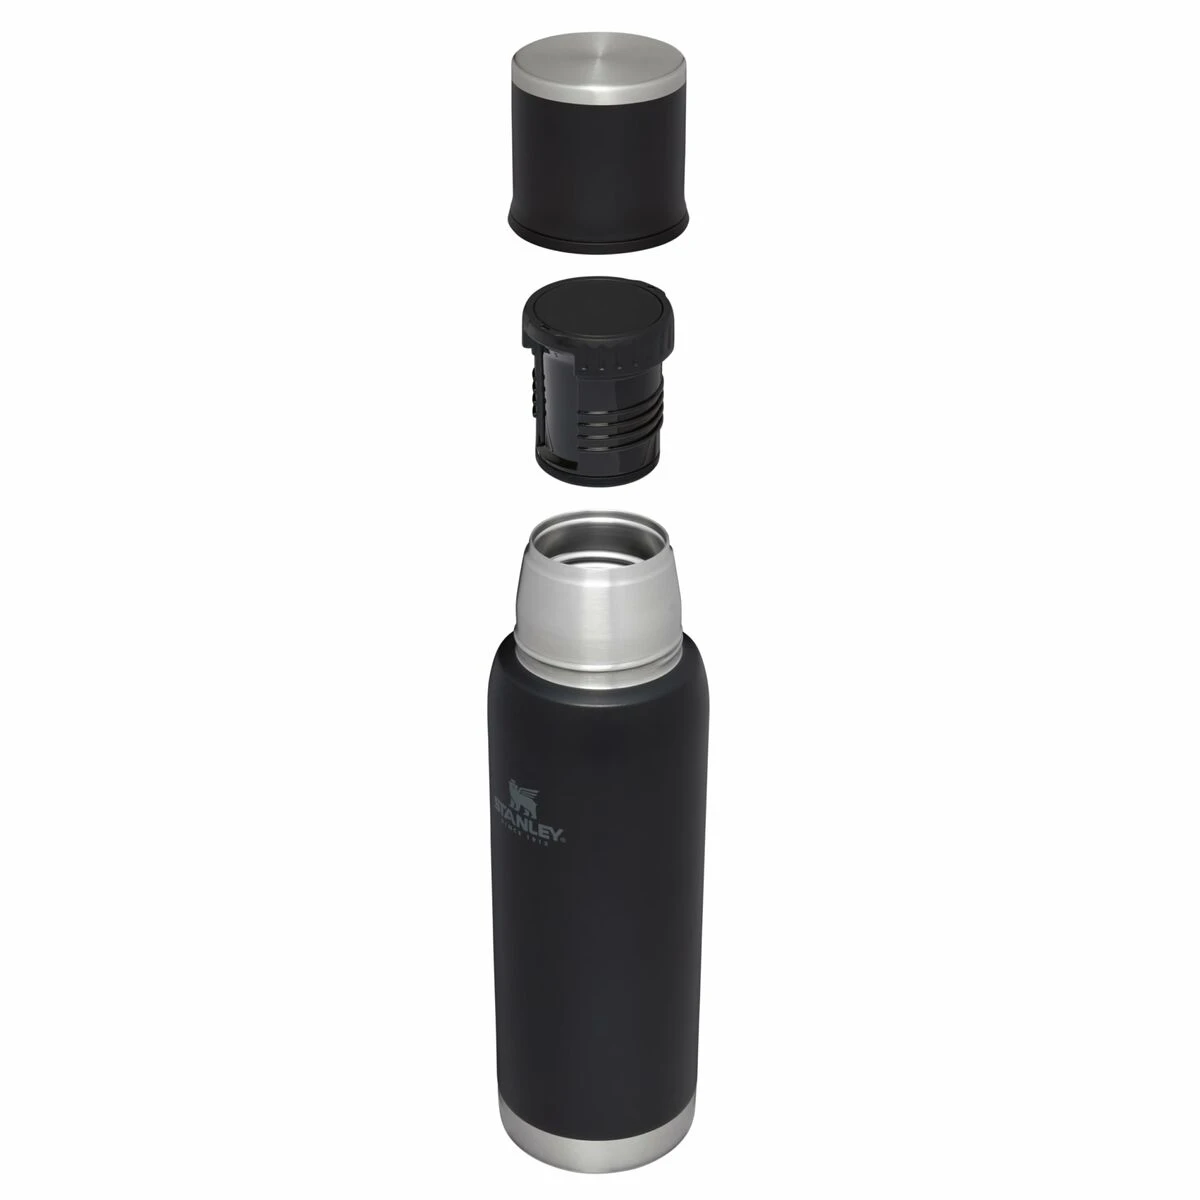 Black insulated bottle disassembled into three parts